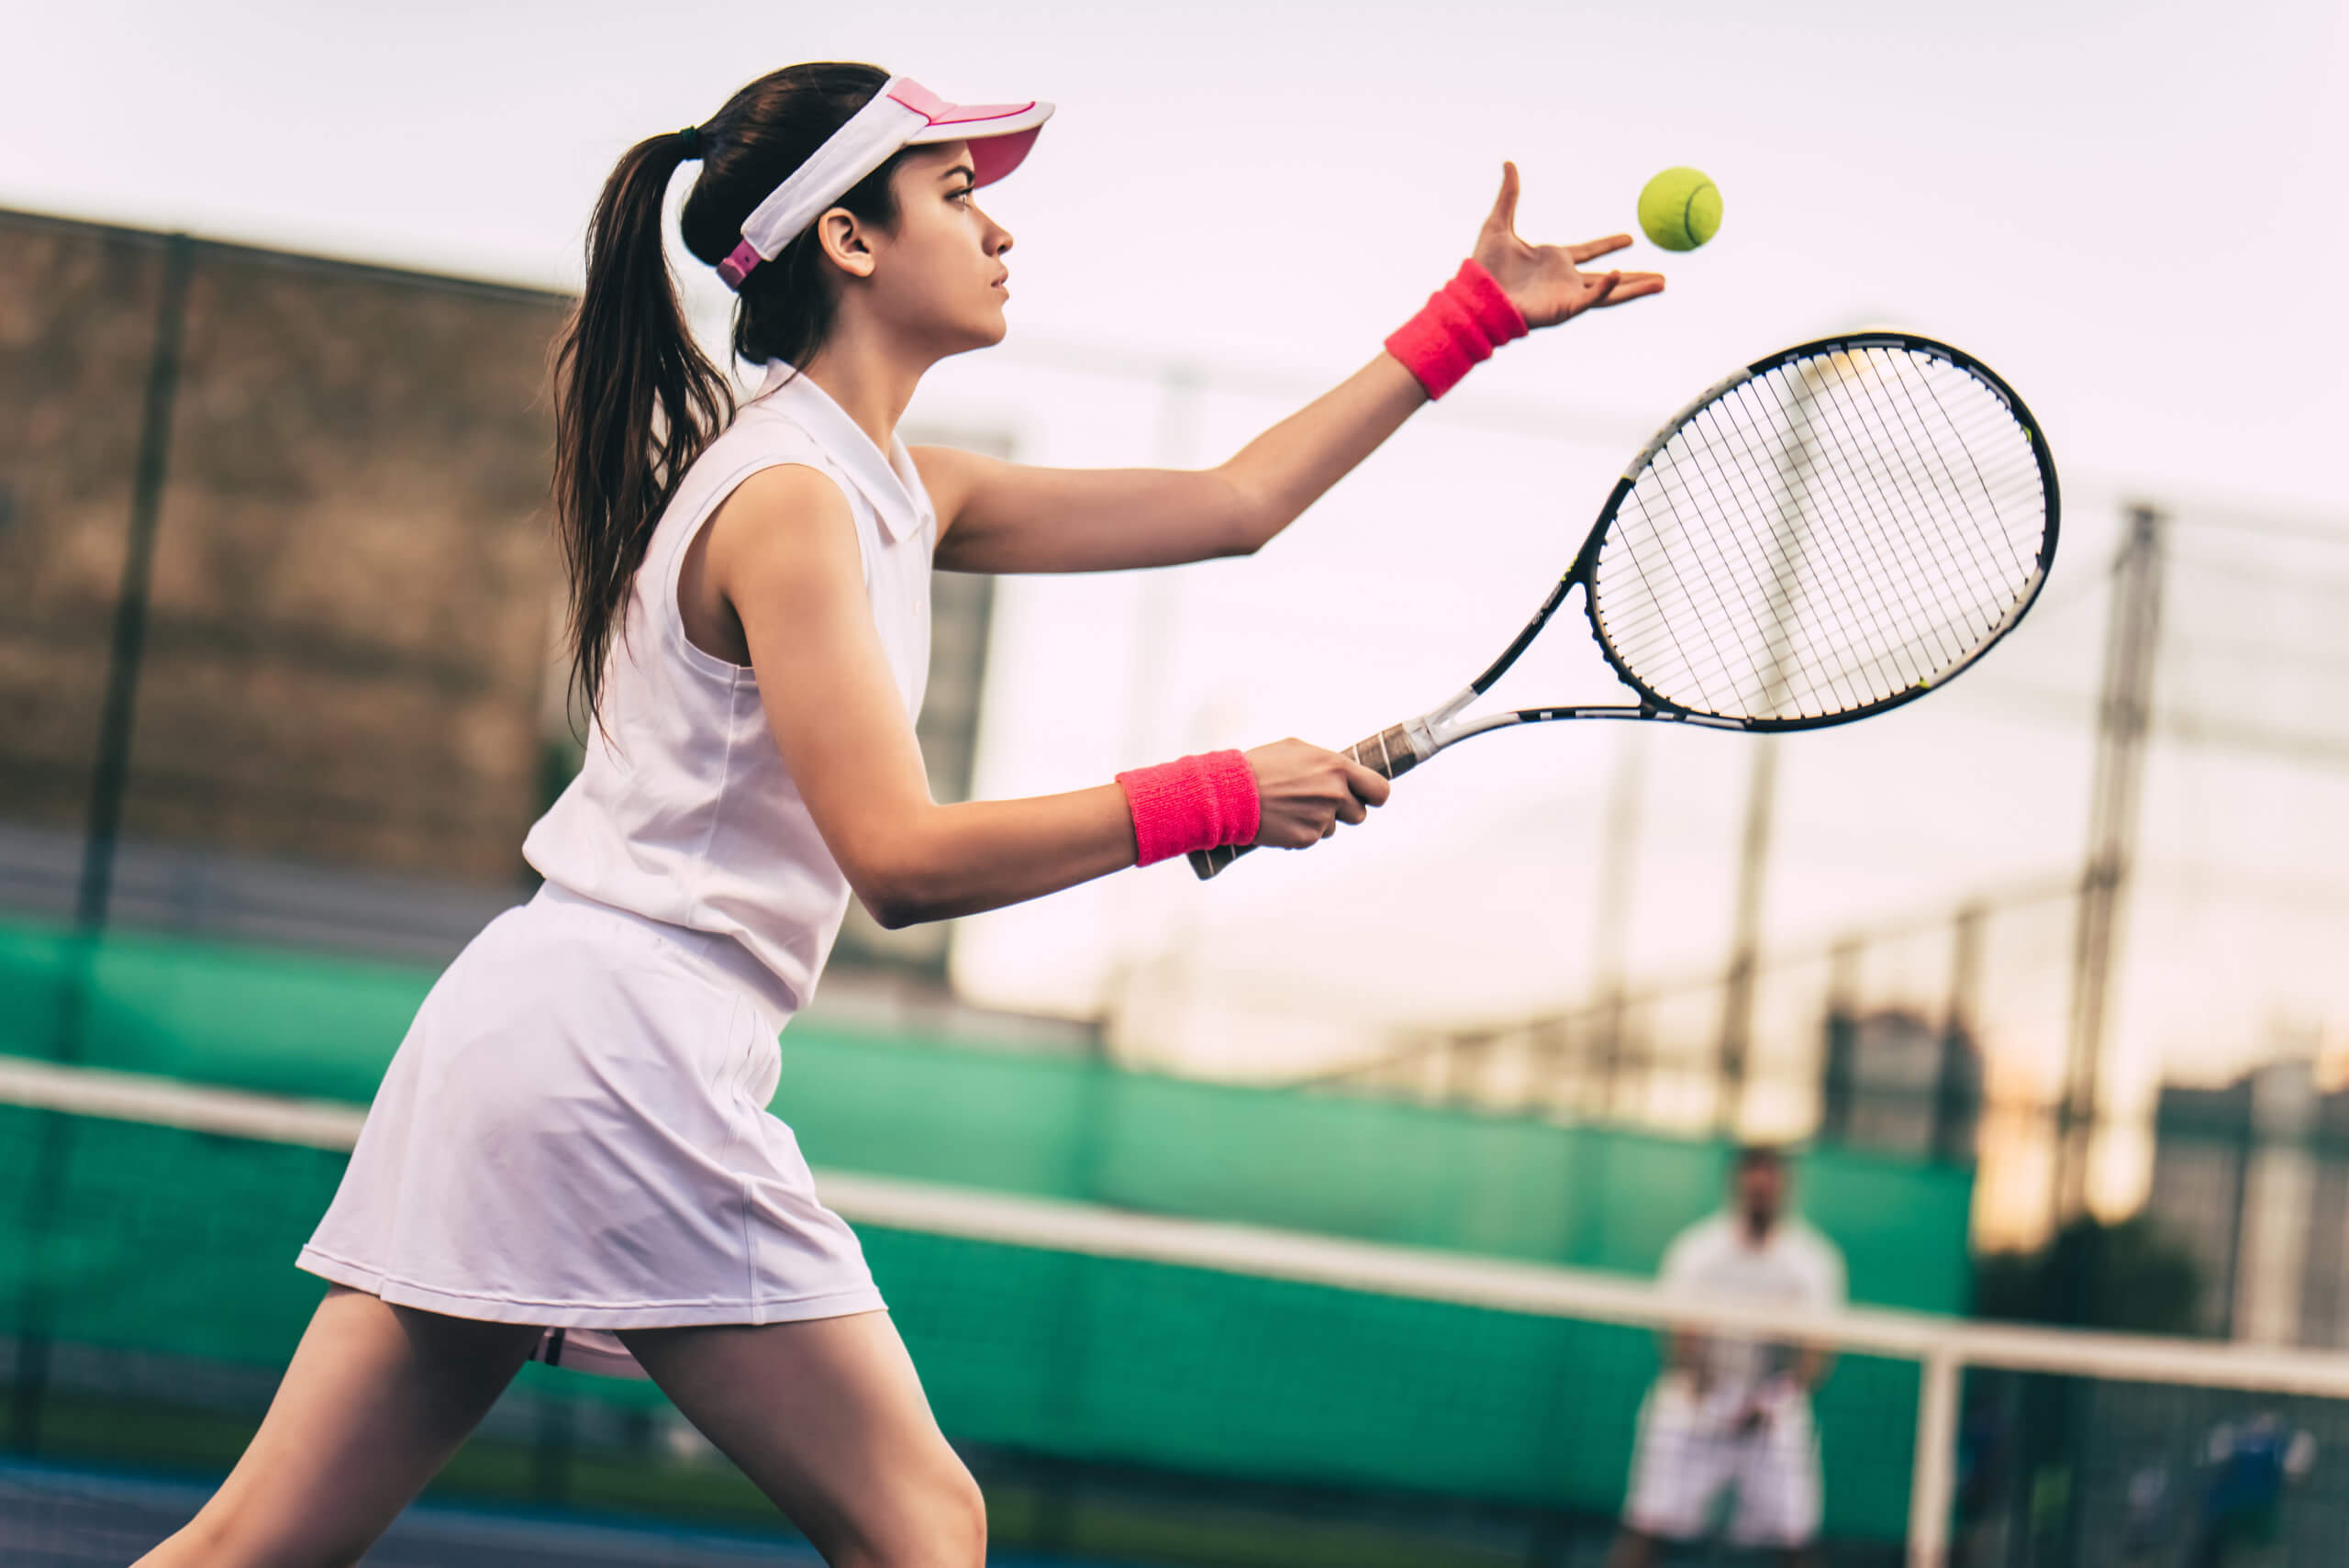 A young woman prepares to serve the ball on a tennis court during a game.